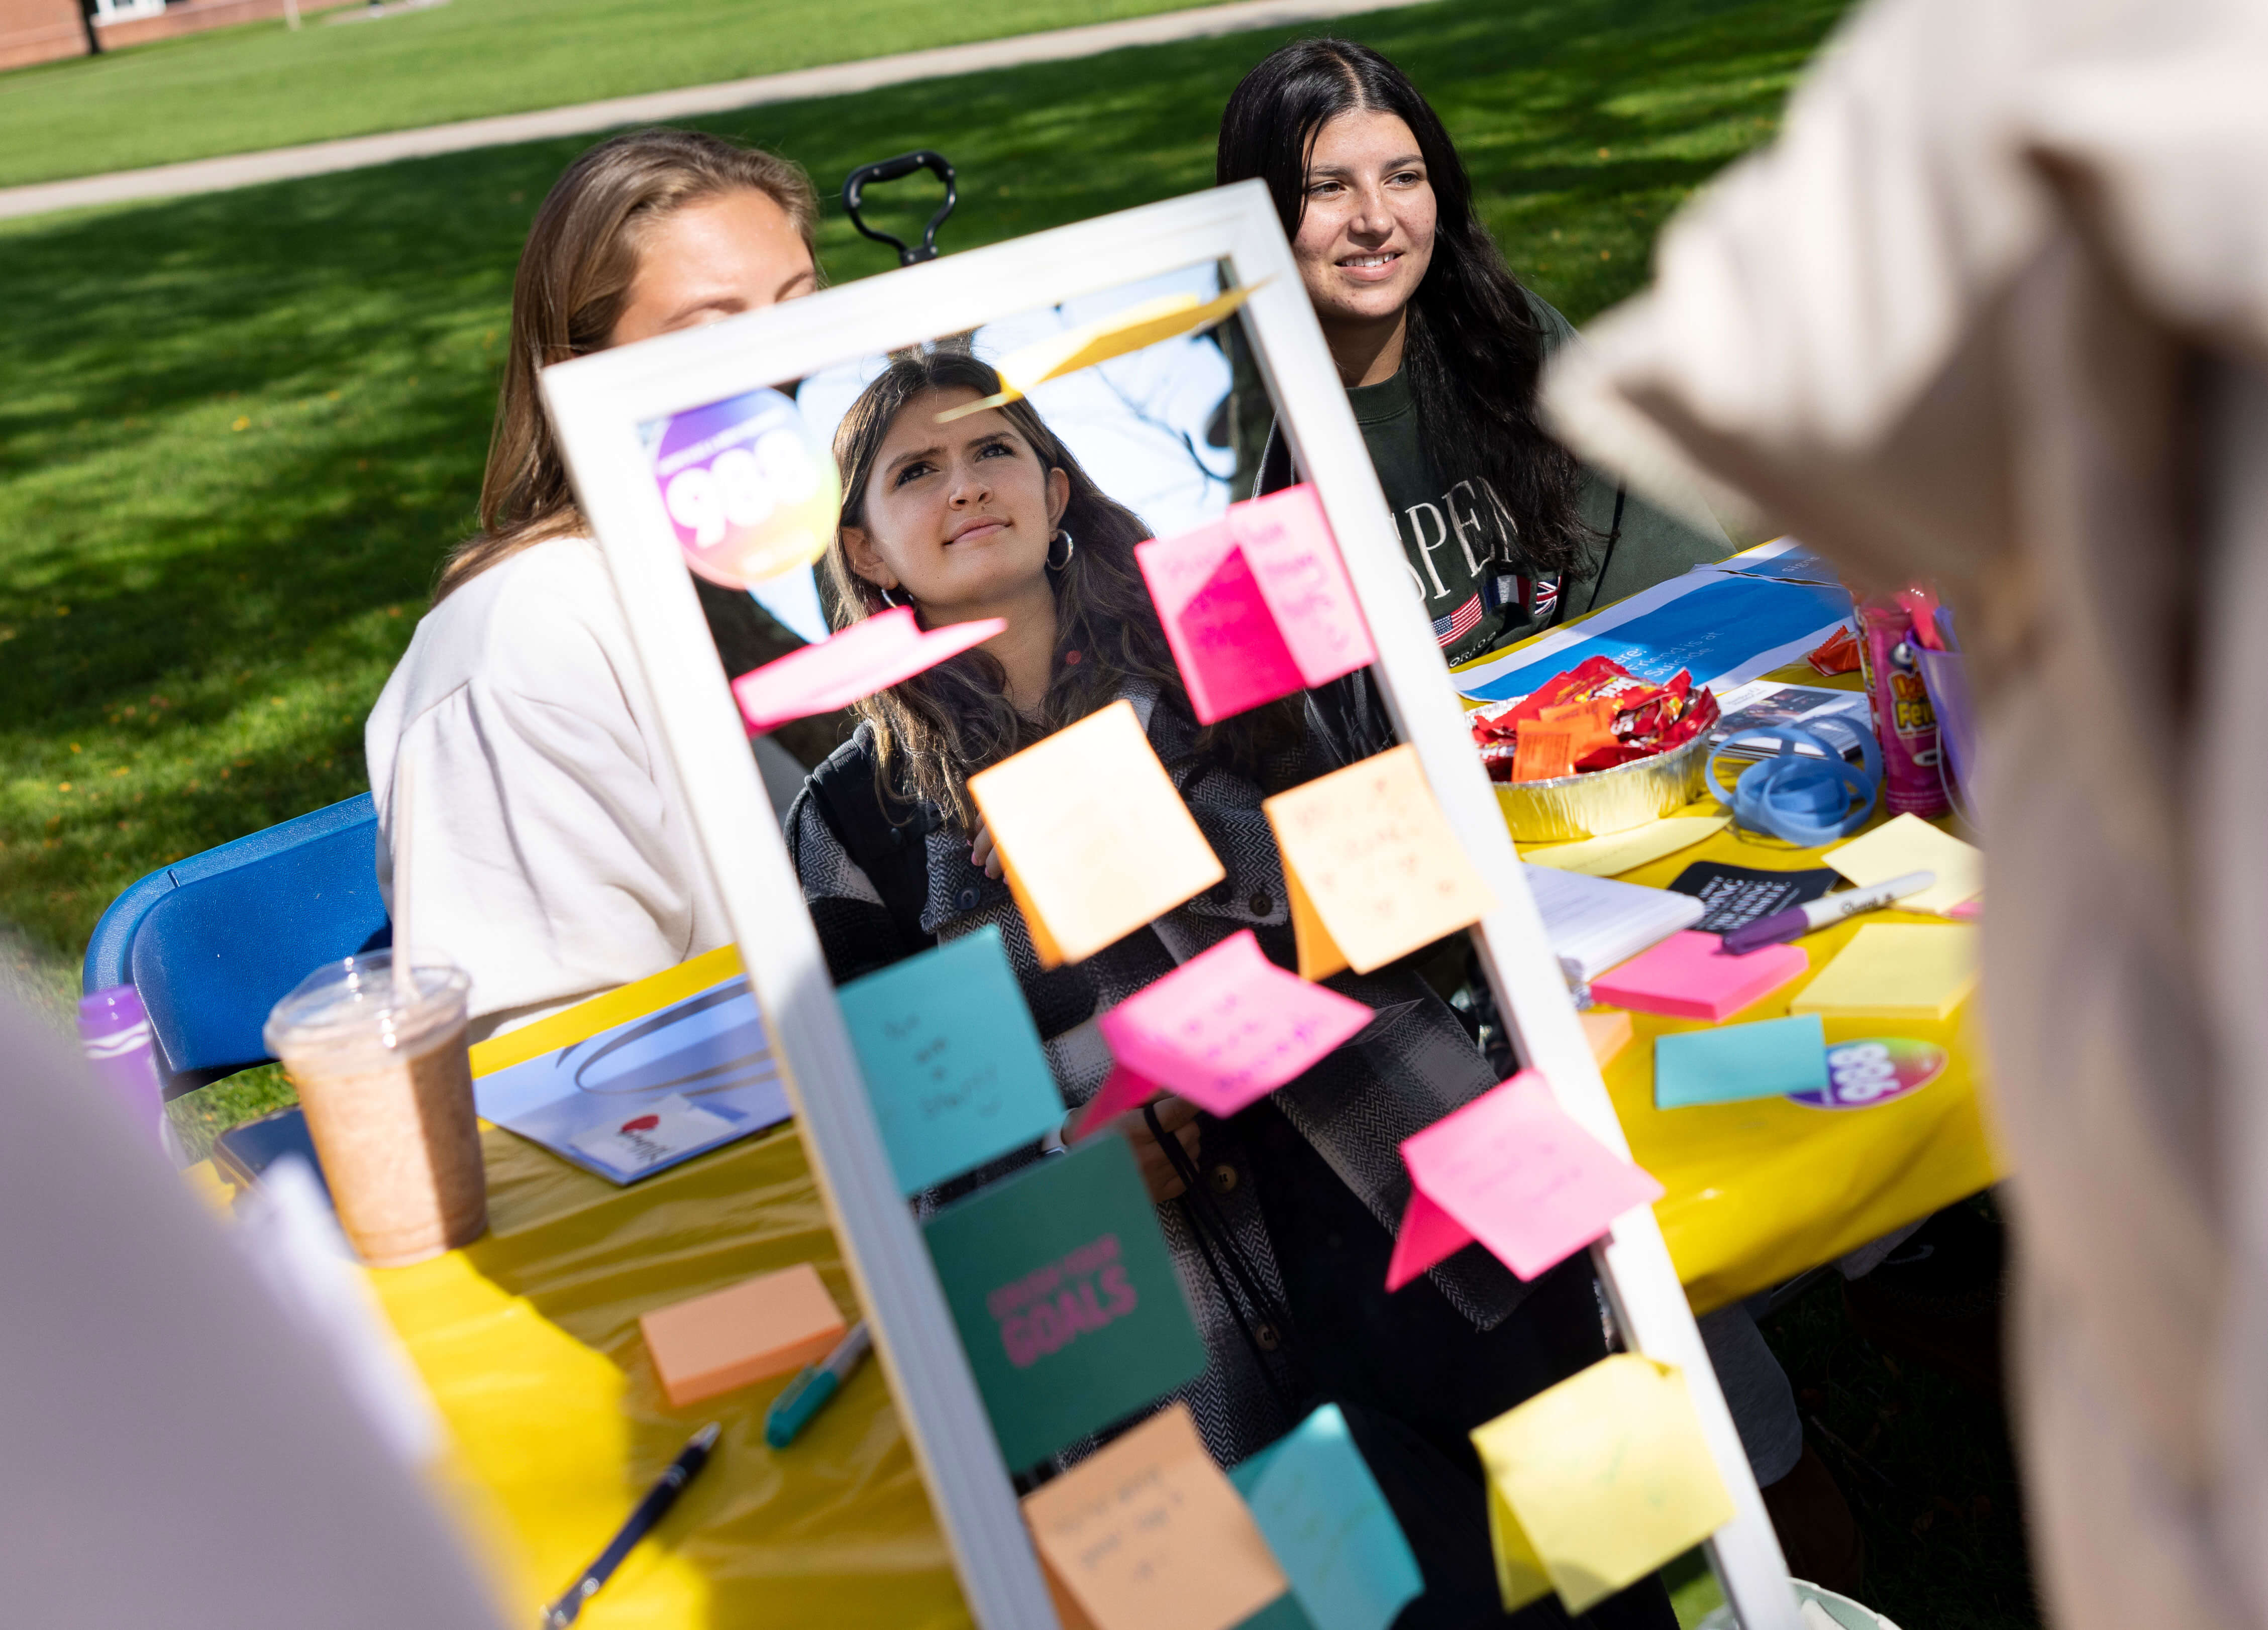 A student looks into a mirror with post-it notes plastered onto it.